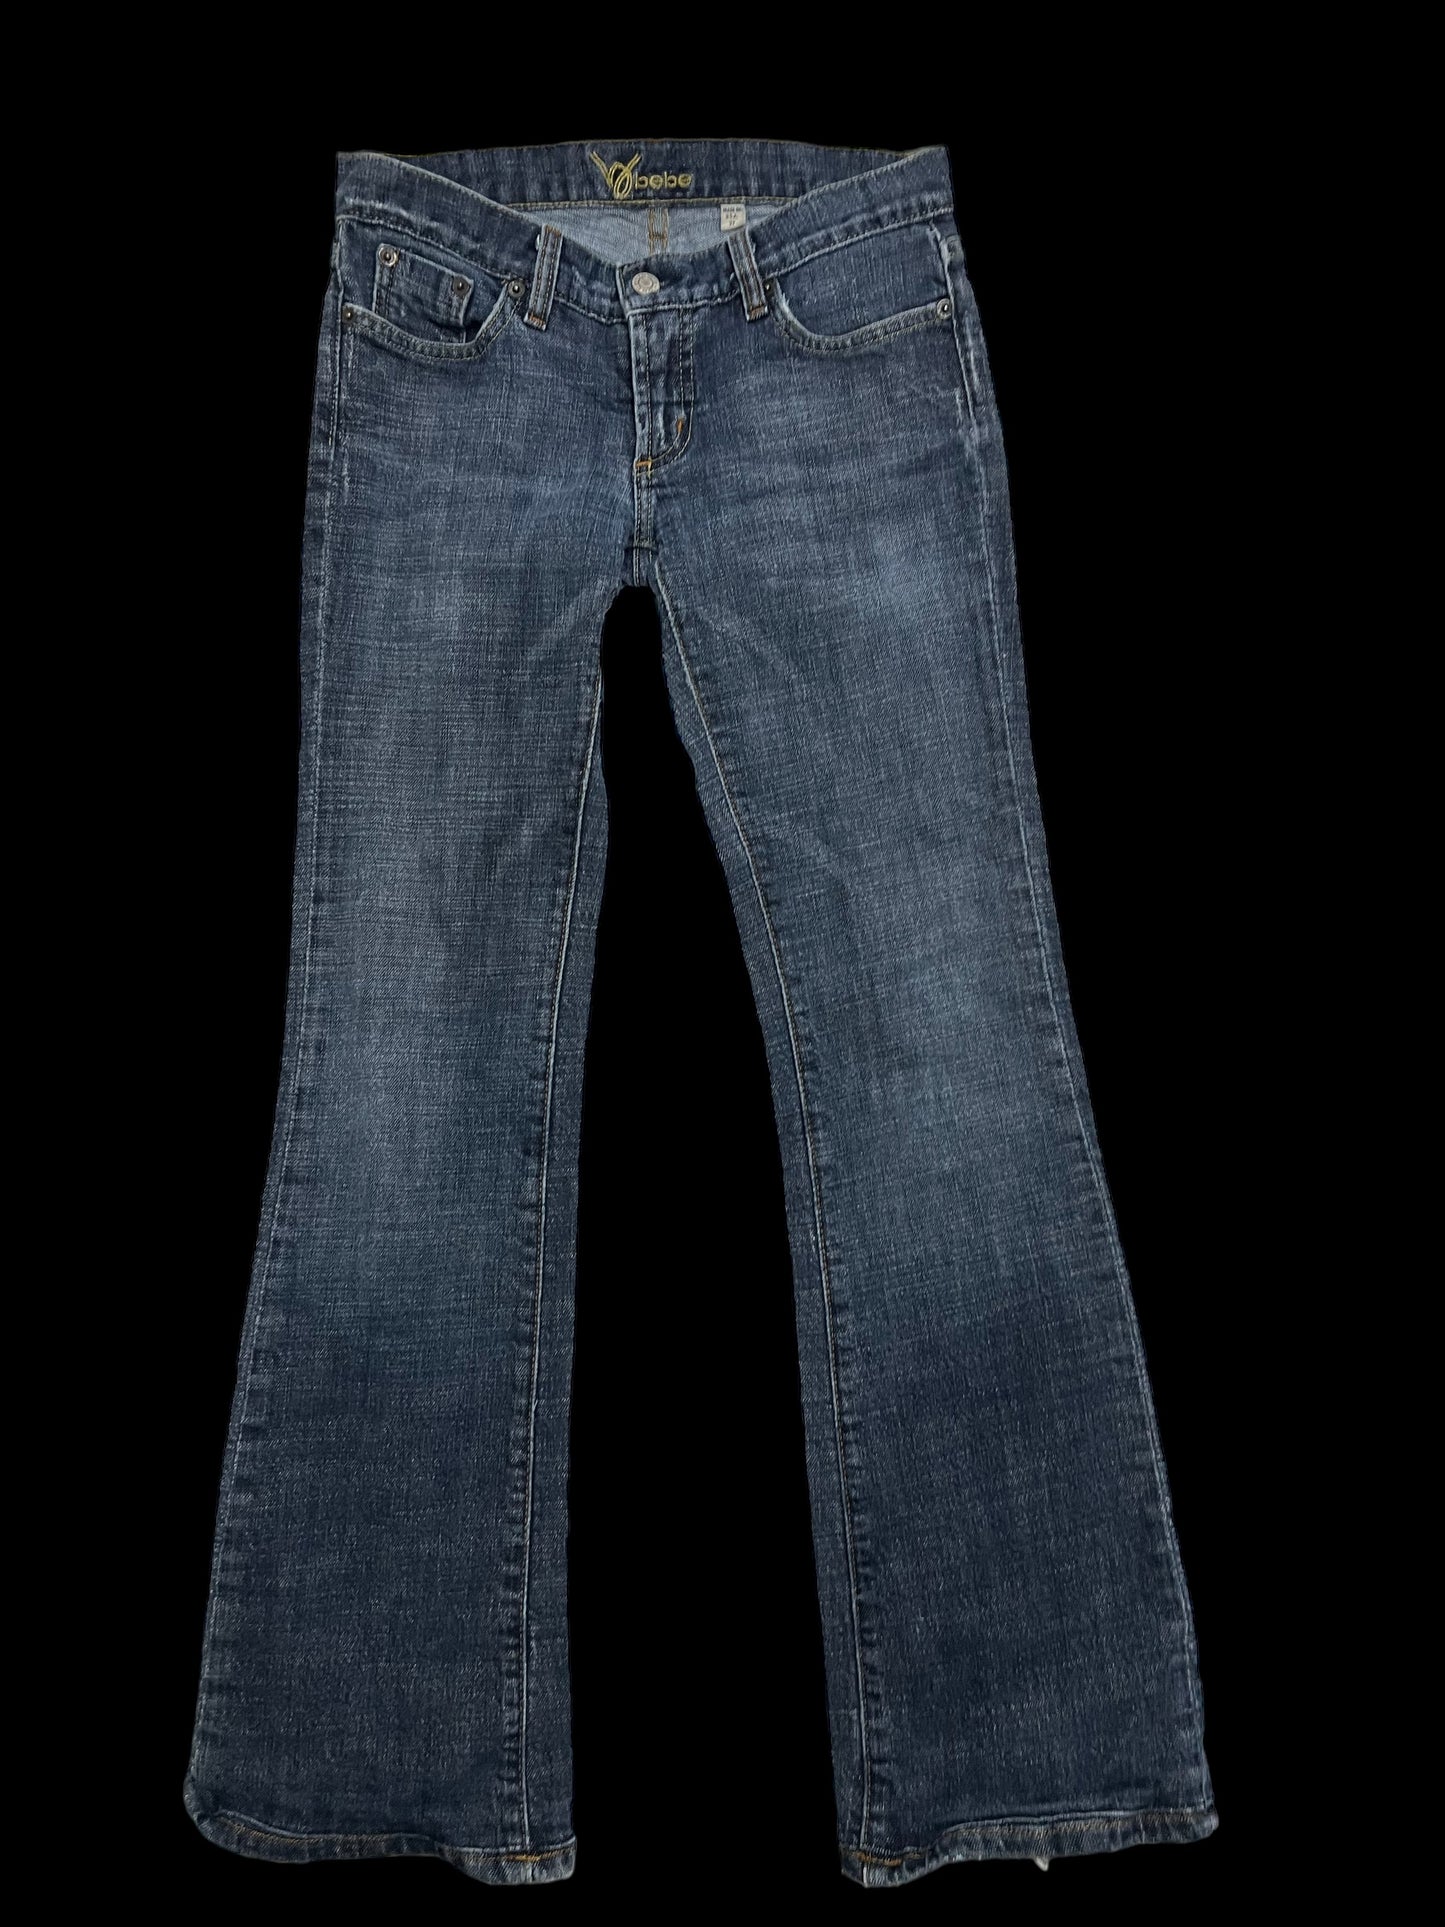 Bebe low rise jeans